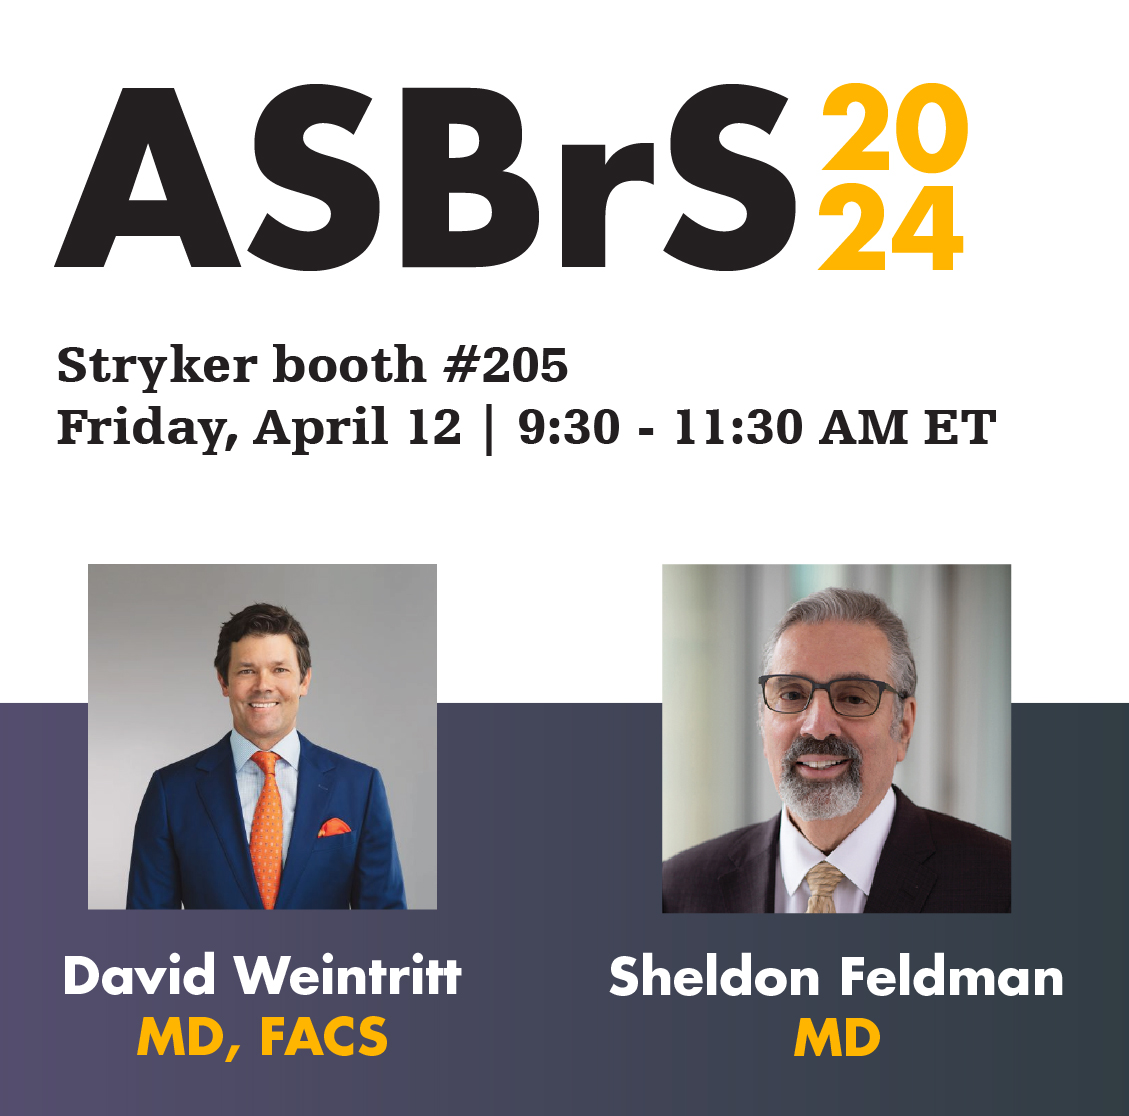 We are less than 1 month away from ASBrS in Orlando, FL! Join Drs. David Weintritt and Sheldon Feldman for a dynamic, in-booth discussion on SPY fluorescence visualization of lymphatic channels and nodes during SLN biopsy. We can’t wait to welcome you there! #ASBrS2024 #SPY